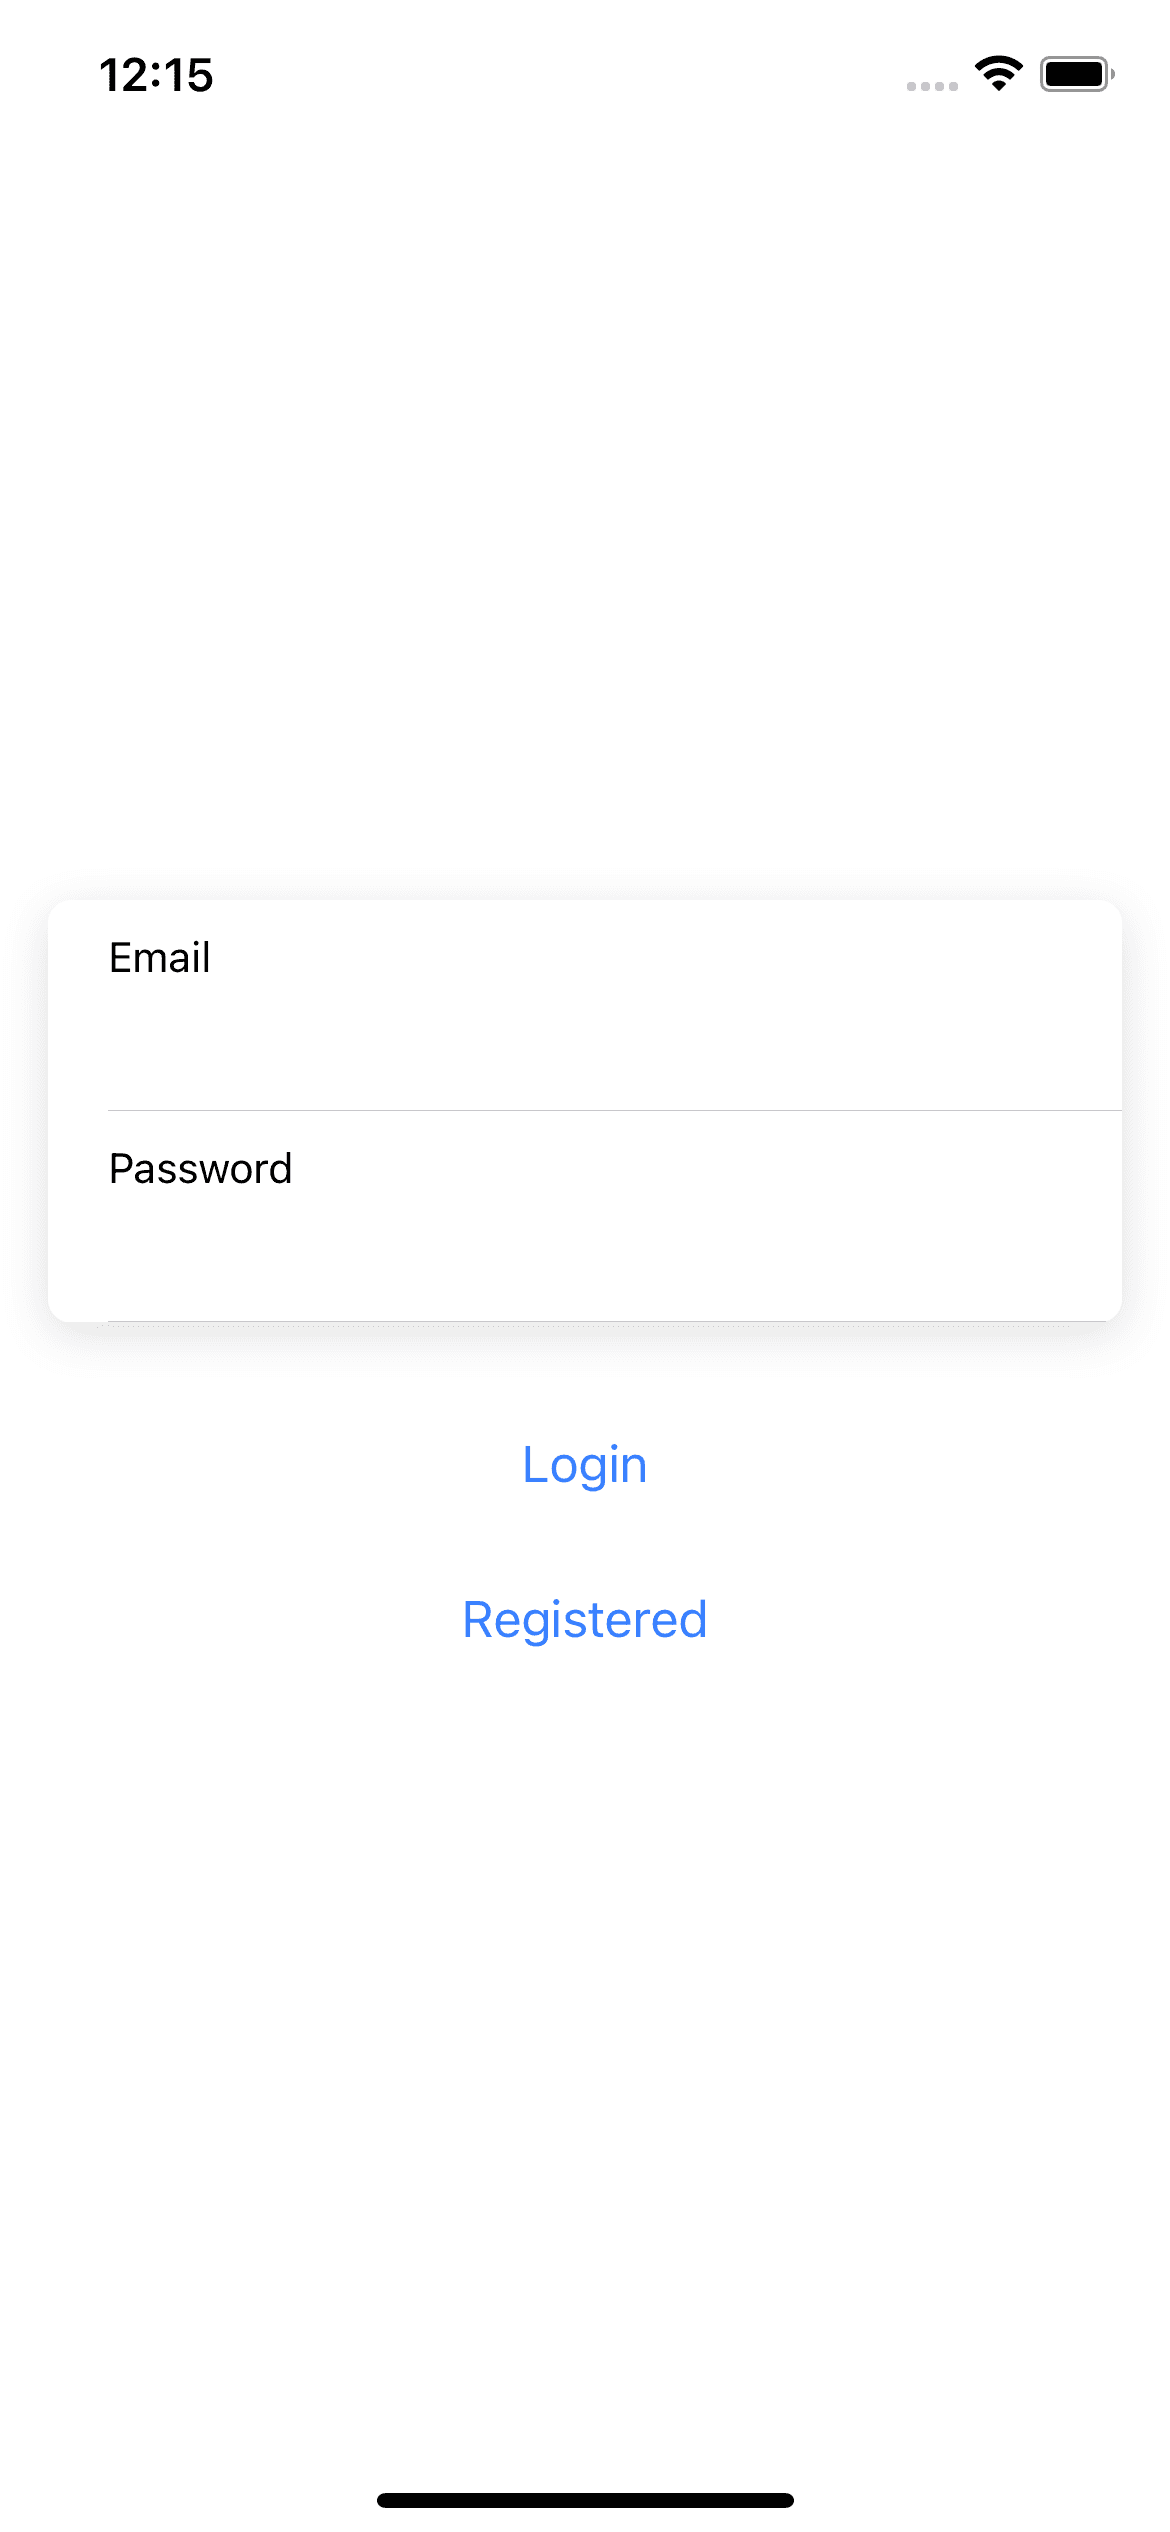 Login screen in iOS asking for user and password running in a browser. There’s a Login and Register button.